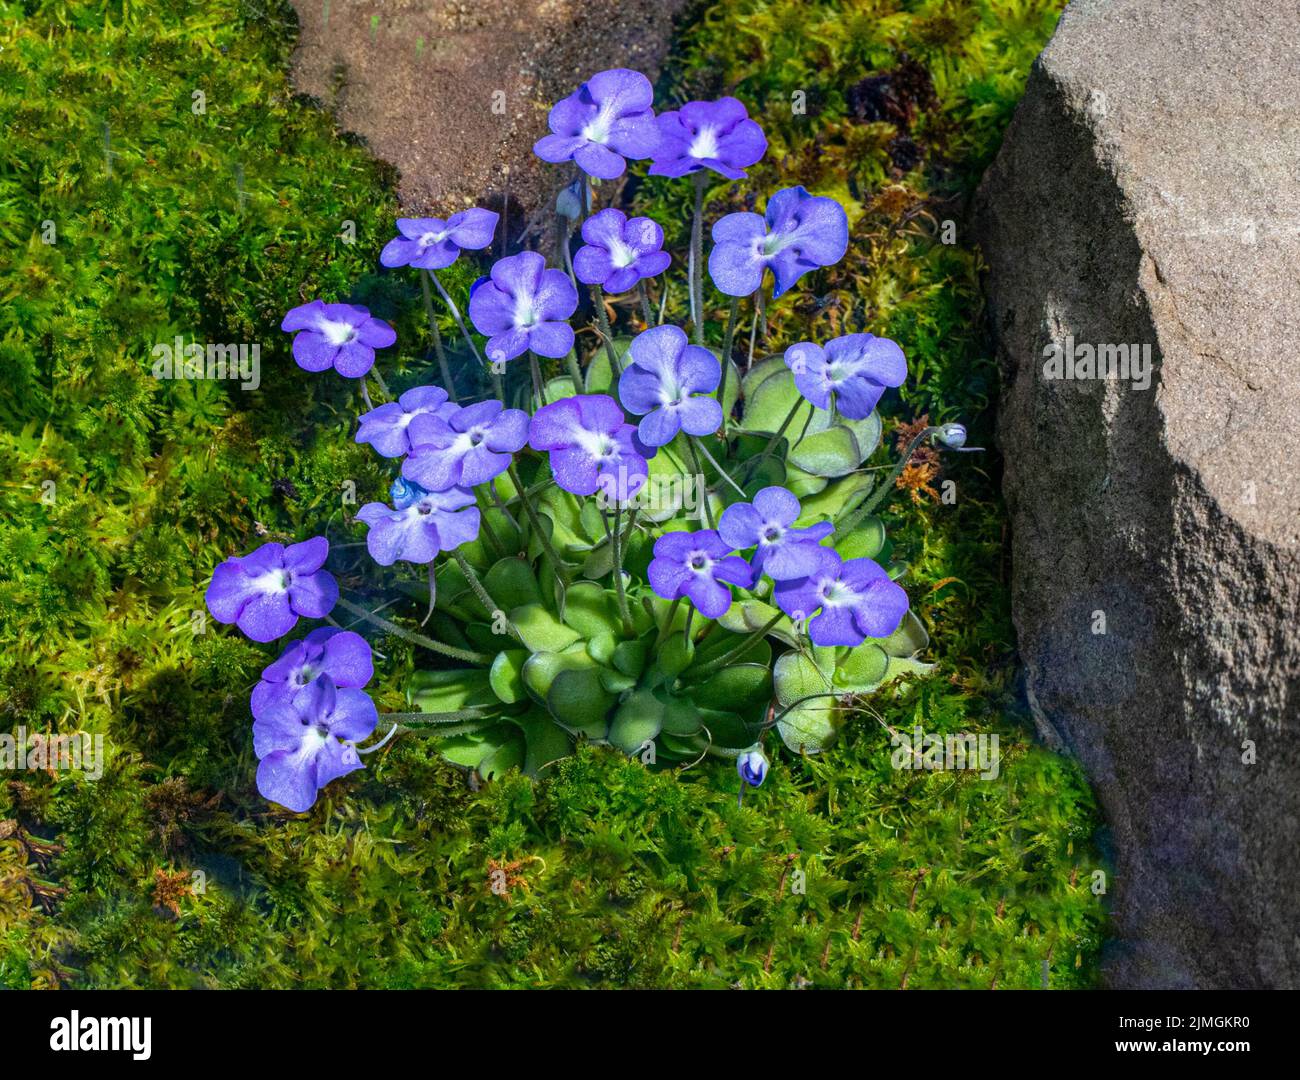 Mexican butterwort (Pinguicula cyclosecta) is a carnivorous or insectivorous plant endemic to Mexico. Stock Photo